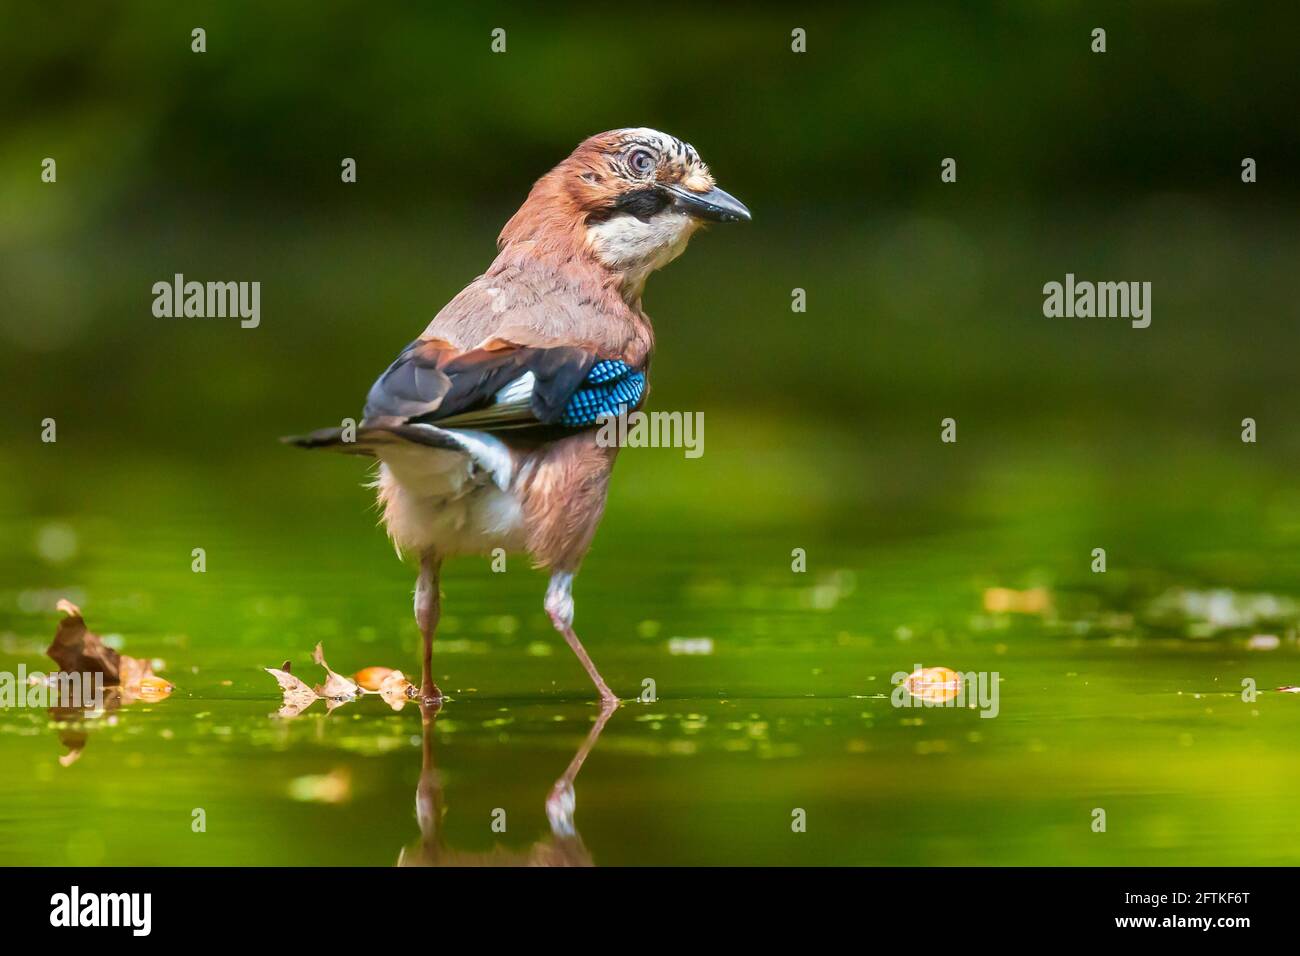 Closeup of a Eurasian jay Garrulus glandarius bird drinking, washing, preening and cleaning in water. Selective focus and low poit of view Stock Photo